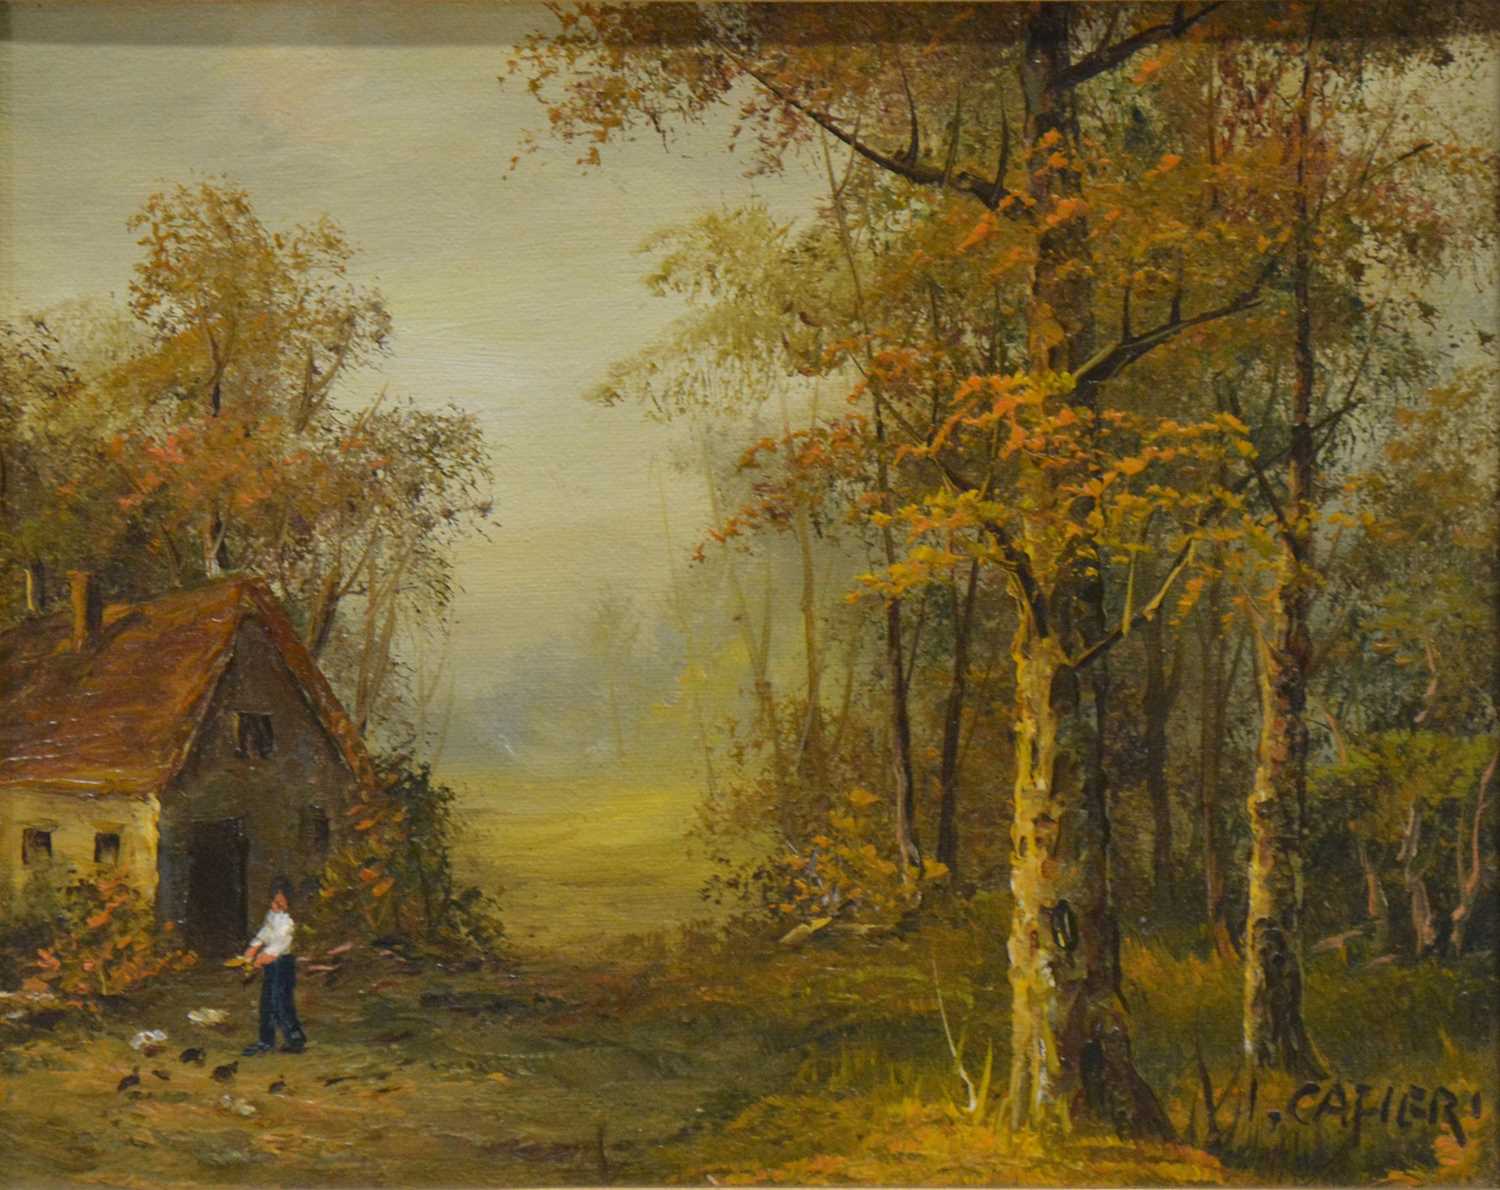 Irene Cafieri, Figure in a woodland landscape, and other small oils